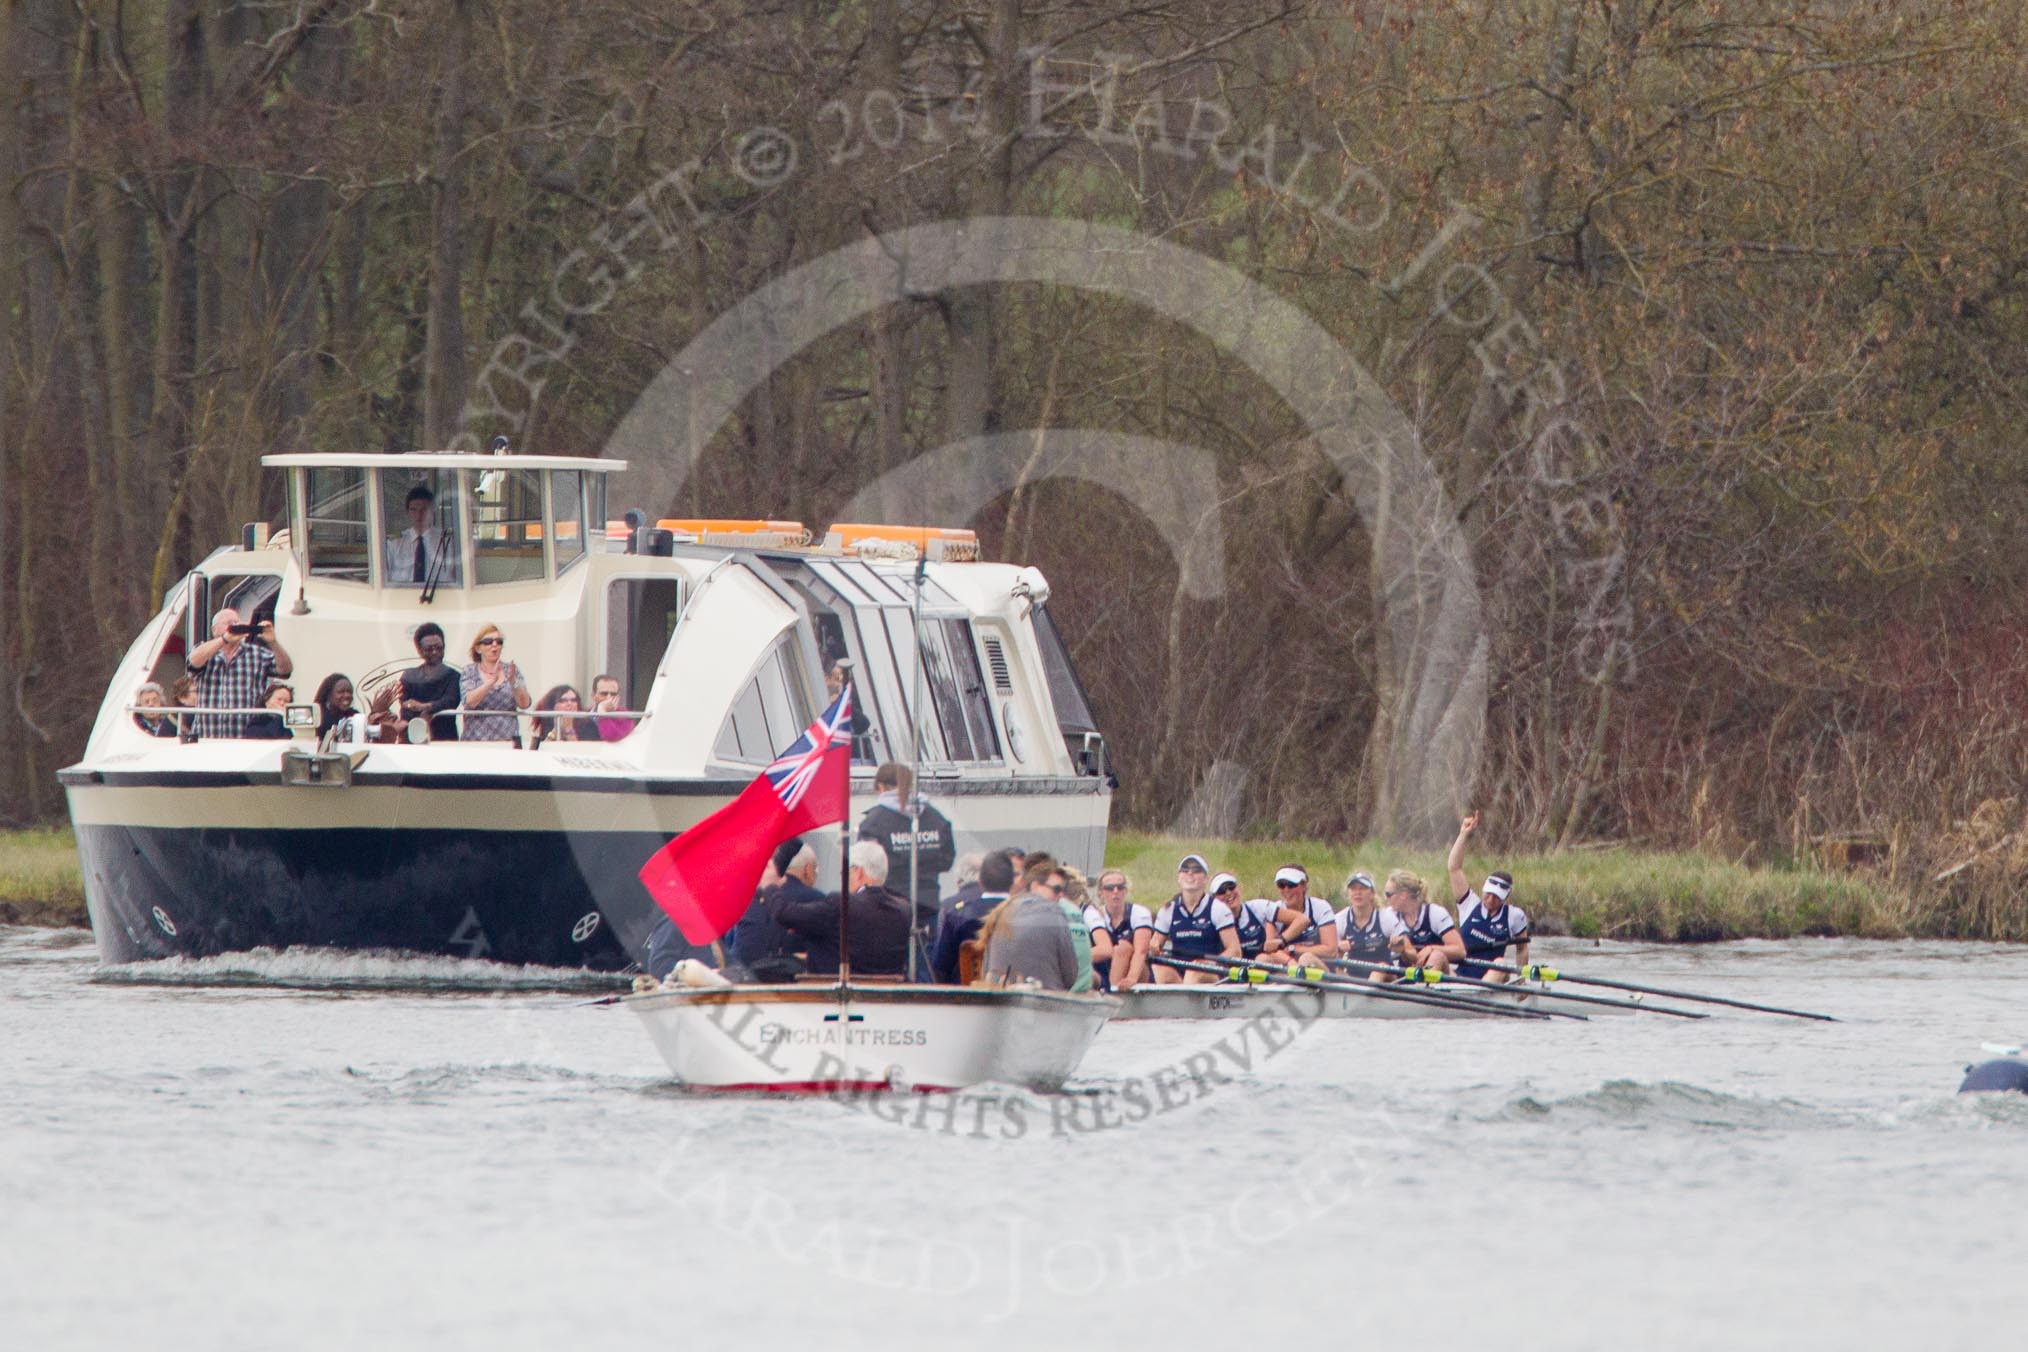 The Women's Boat Race and Henley Boat Races 2014: The Newton Women's Boat Race - a jubilant Oxford crew has won the race..
River Thames,
Henley-on-Thames,
Buckinghamshire,
United Kingdom,
on 30 March 2014 at 15:16, image #325